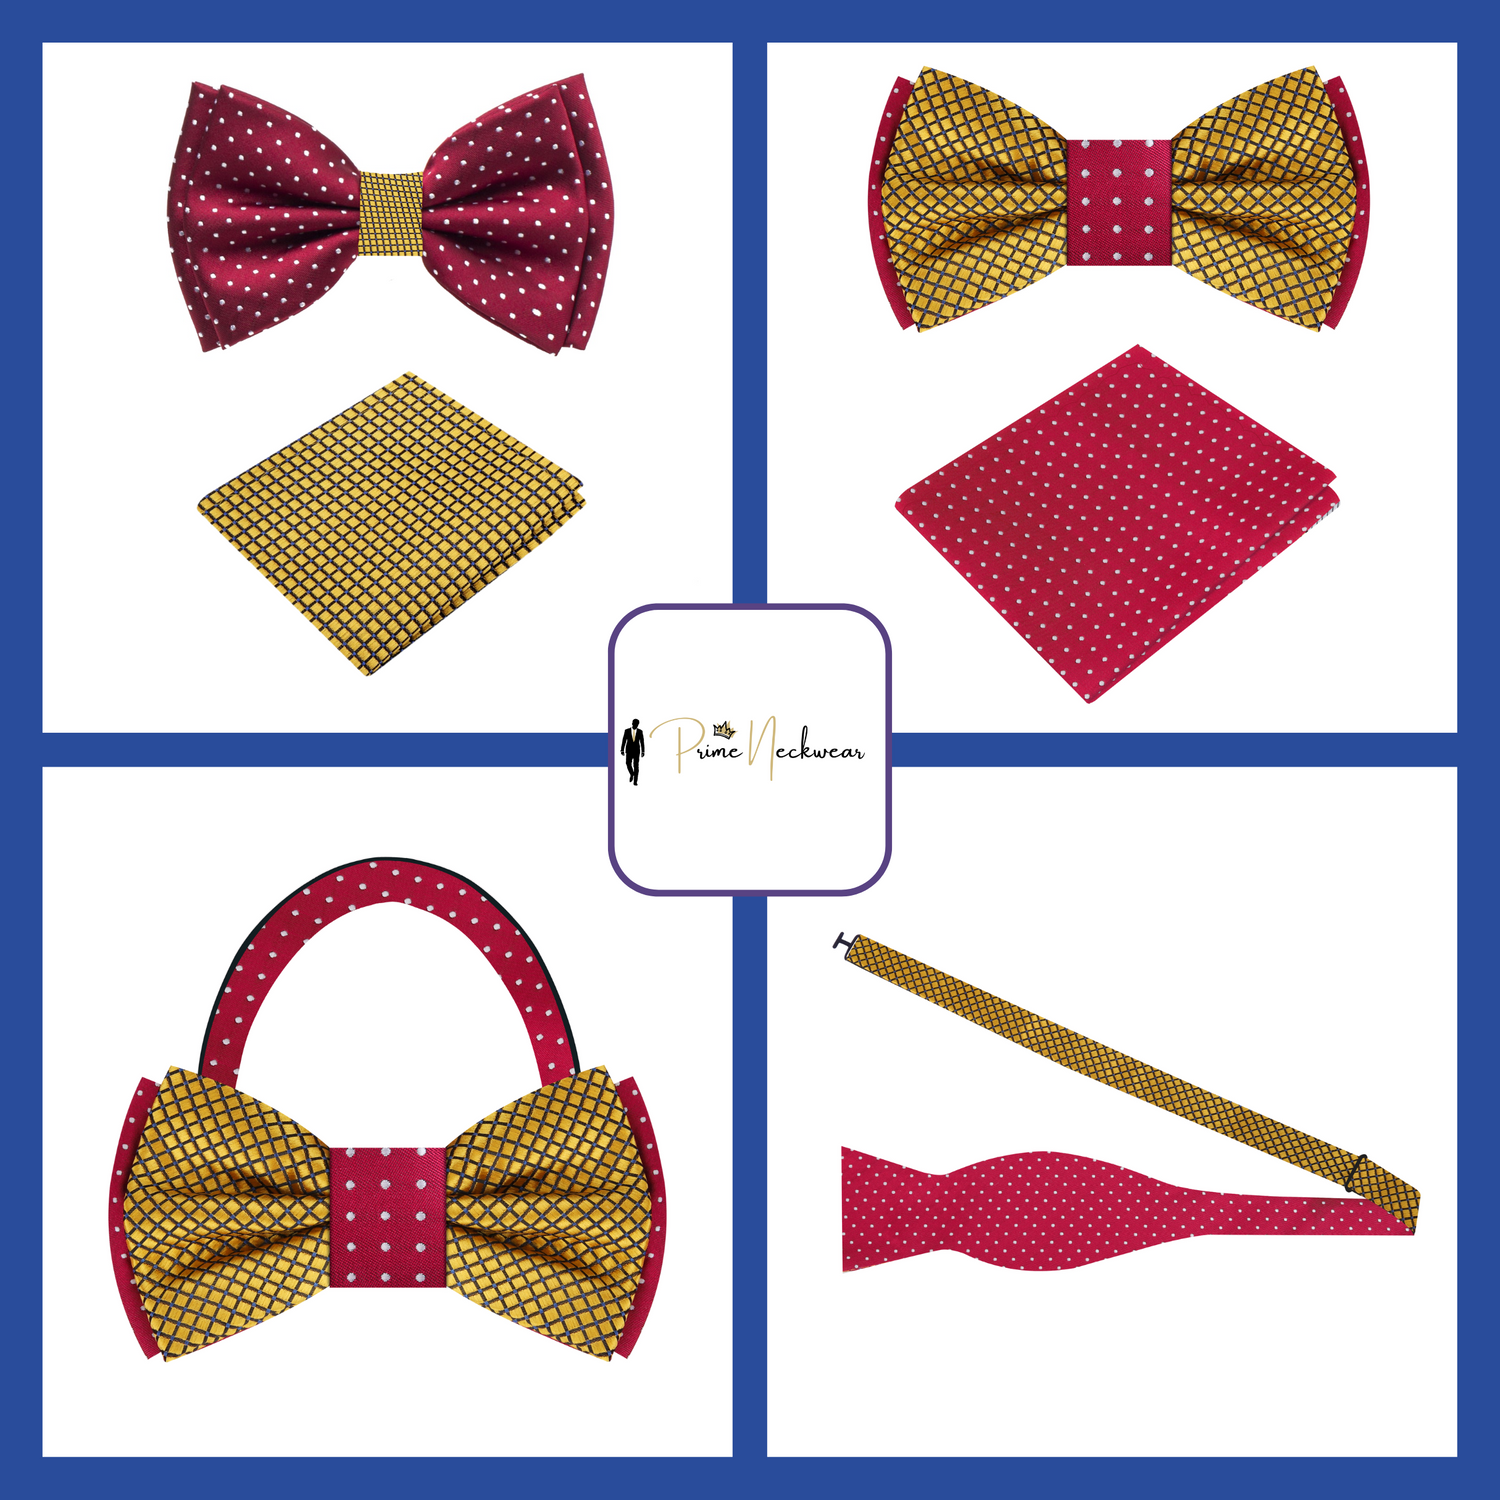 Double Sided Bow Tie Showing Both Sides of The Burgundy and White Dot or Gold Geometric Bow tie